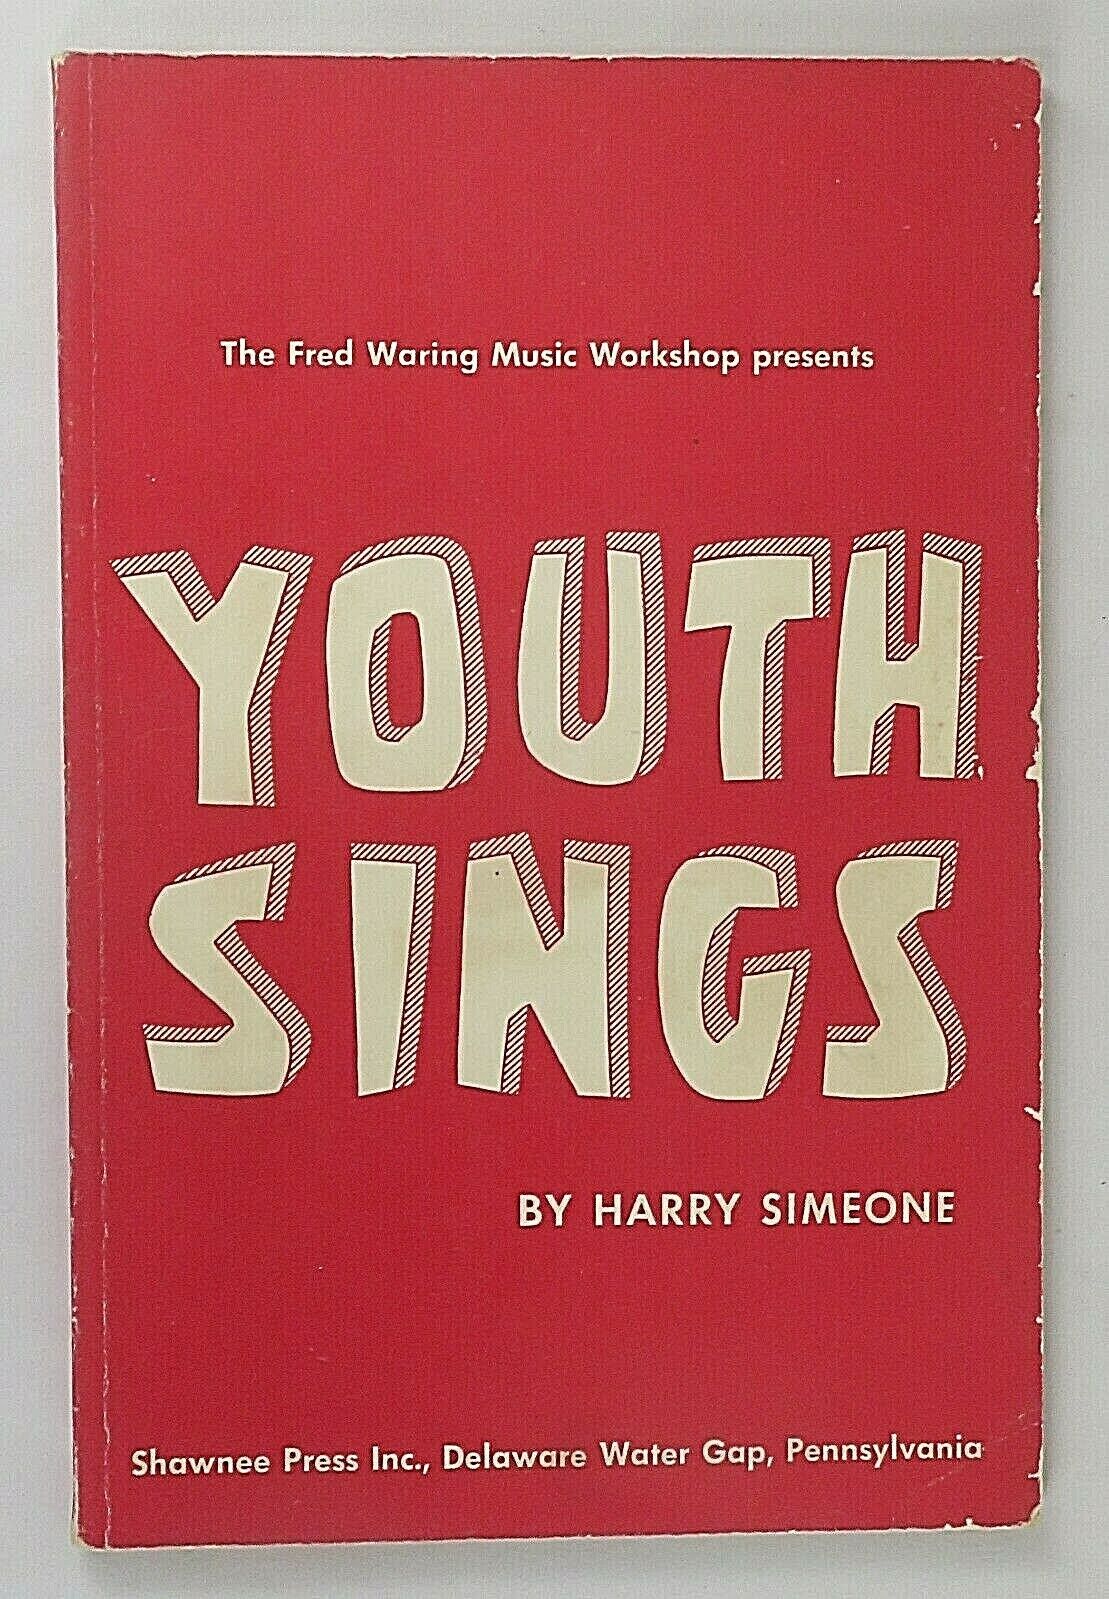 VTG 1954 Youth Sings Religious Song Book Sheet Music Fred Waring Music Workshop